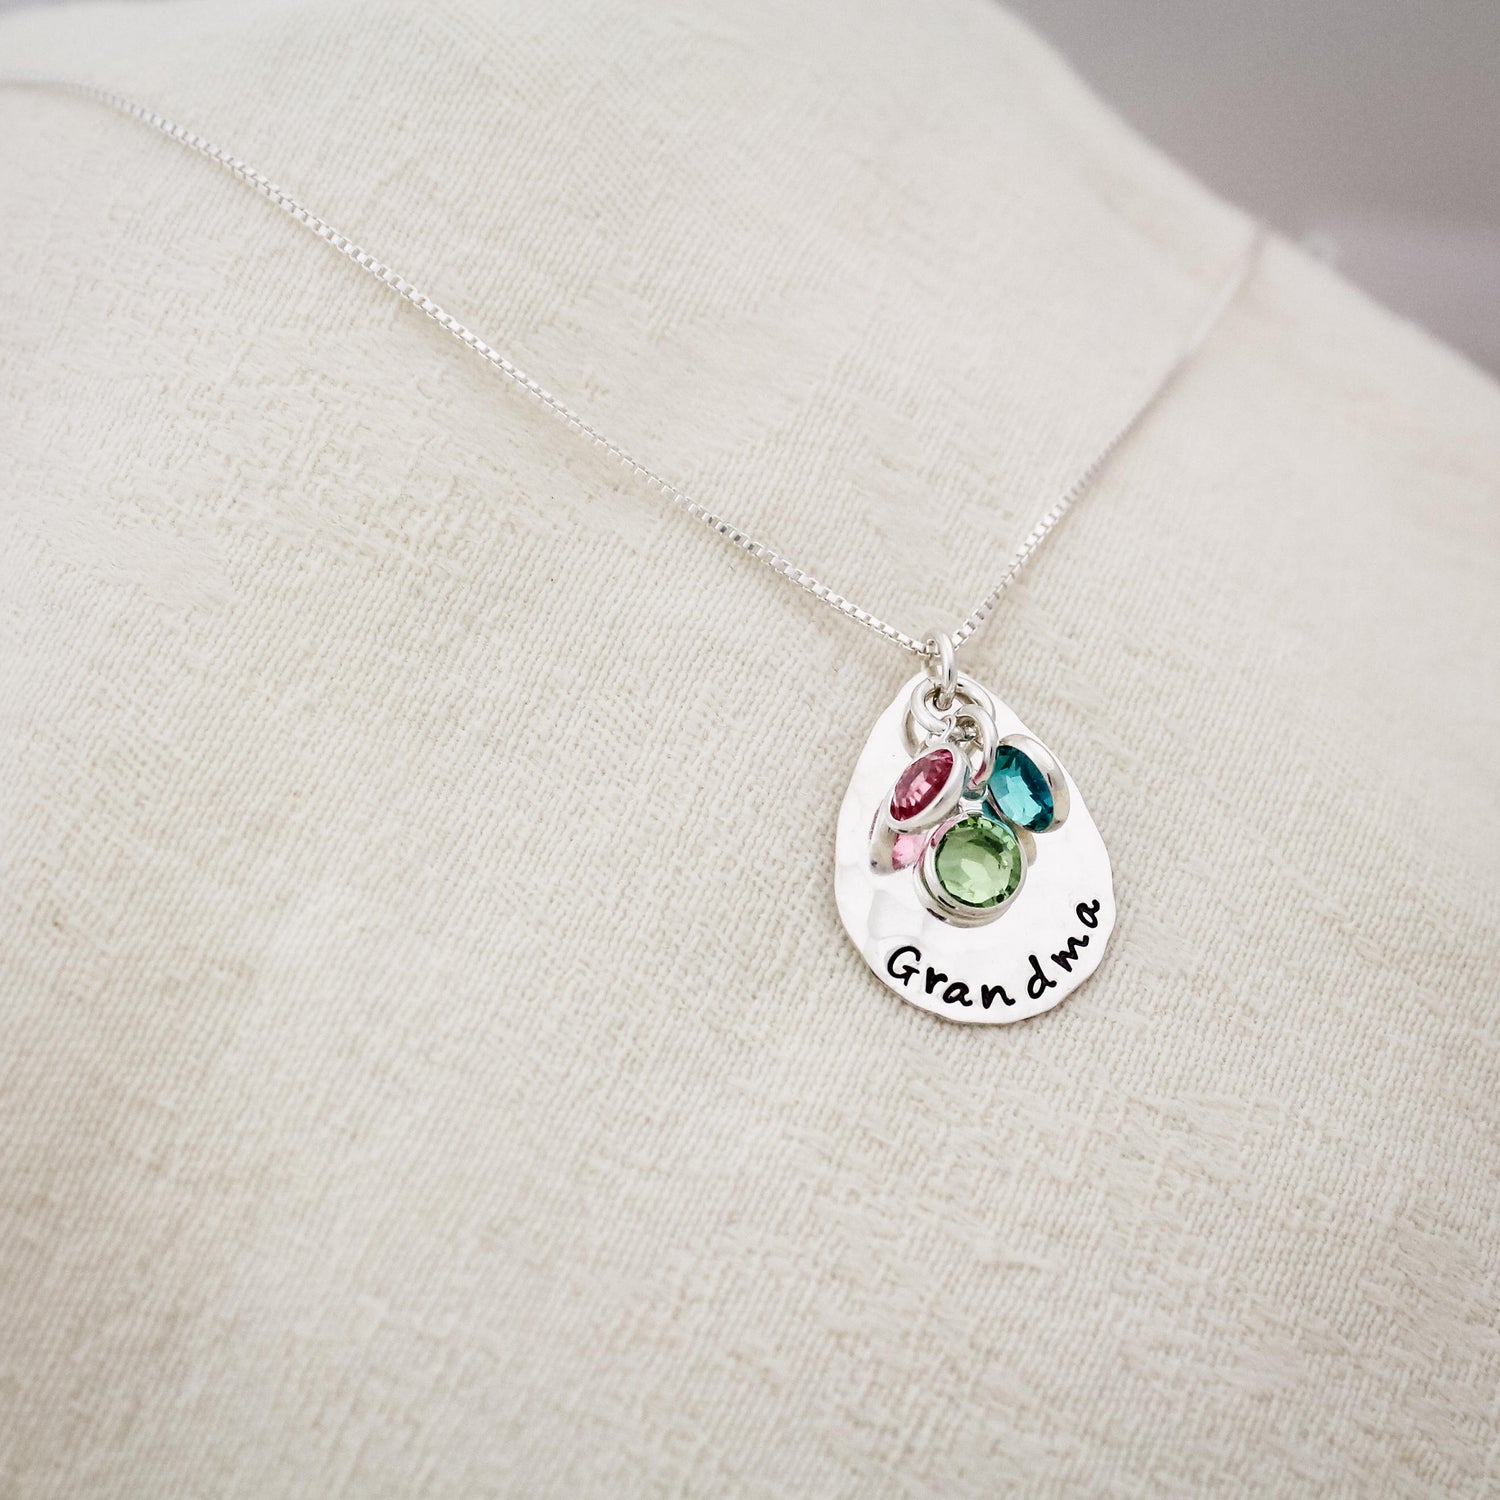 Personalized Grandmother Birthstone Necklace, Mom Mom Necklace, Birthstone Necklace, Grandchildren Necklace, Hand Stamped Personalized